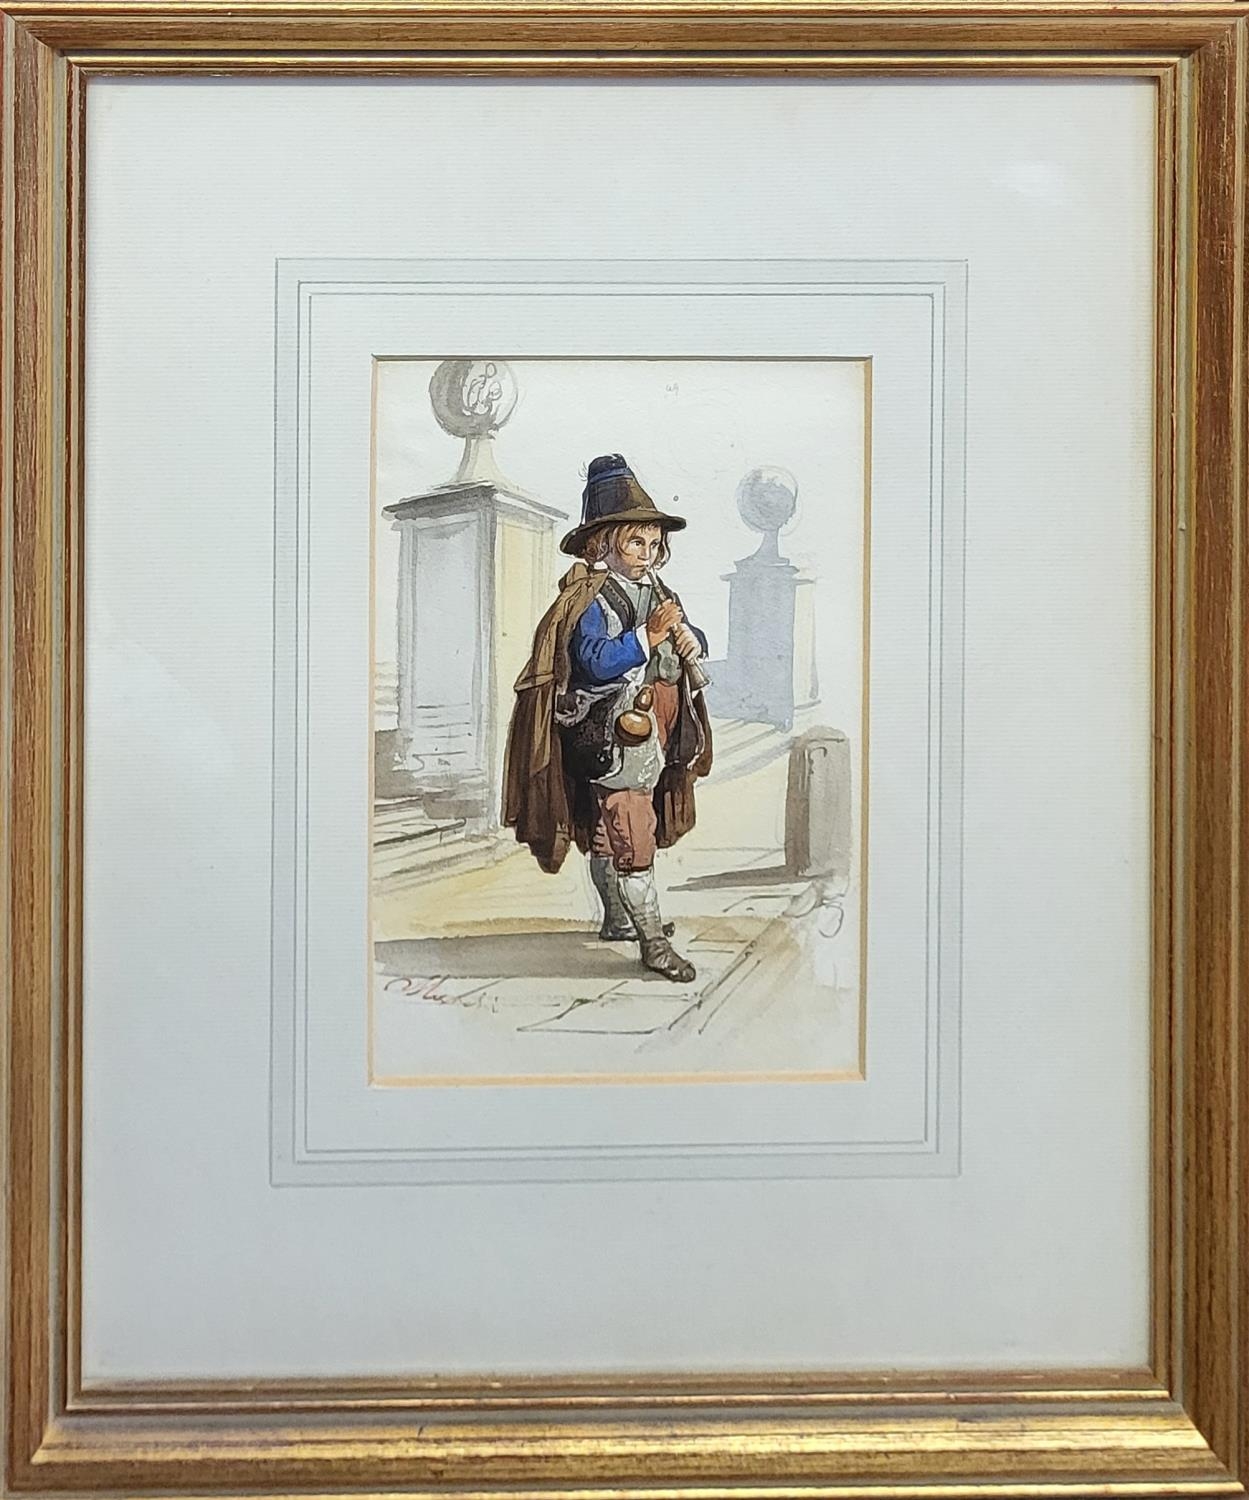 VINCENZO MARCHI, A MID 19TH CENTURY ITALIAN SCHOOL WATERCOLOUR ON PAPER Study of a boy playing a - Image 2 of 10